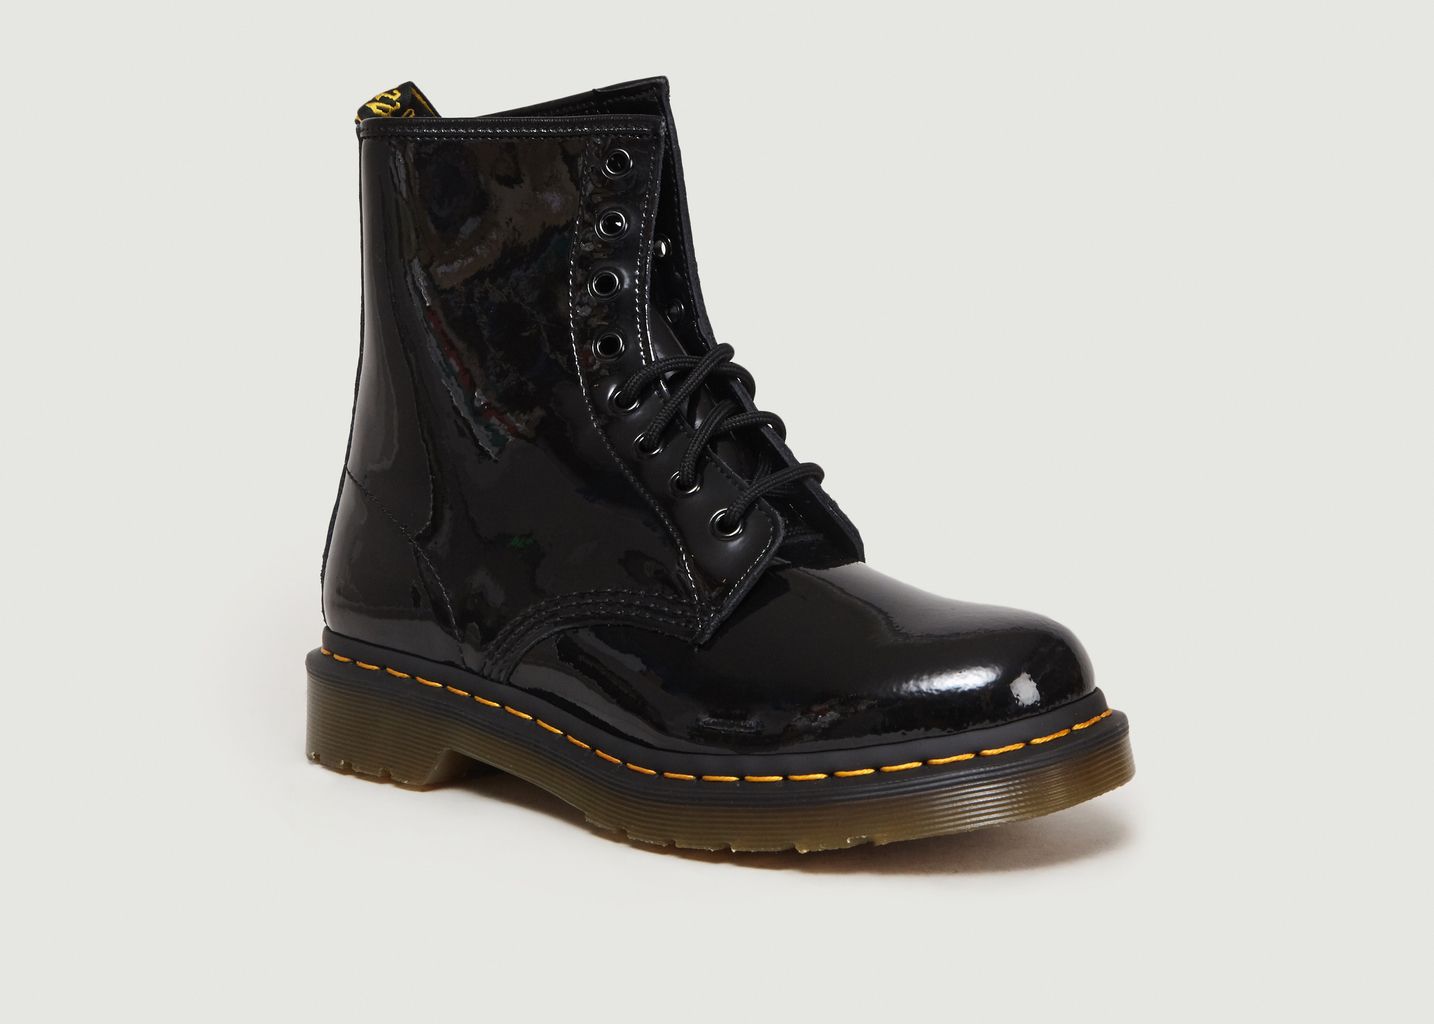 1460 Patent Leather Boots - Dr. Martens